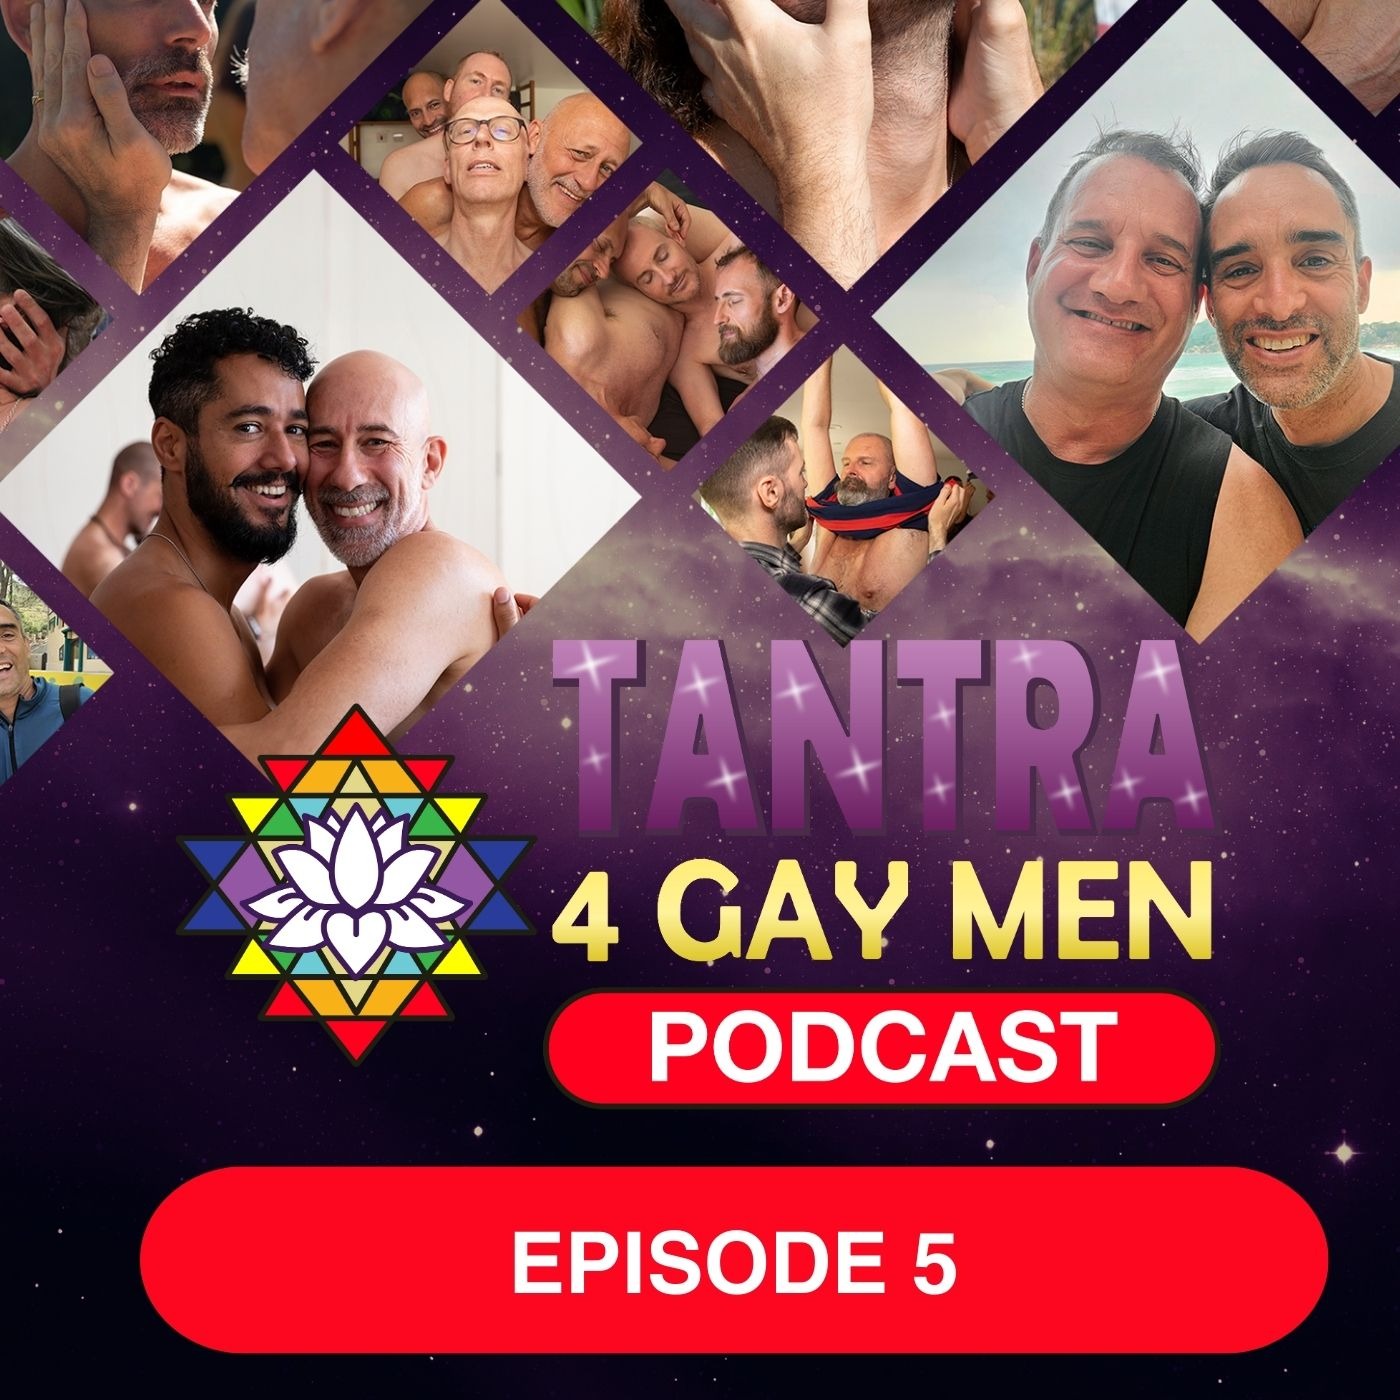 Tantra4GayMen Podcast - Episode 5 - What is a Spiritual Tantric Practice?